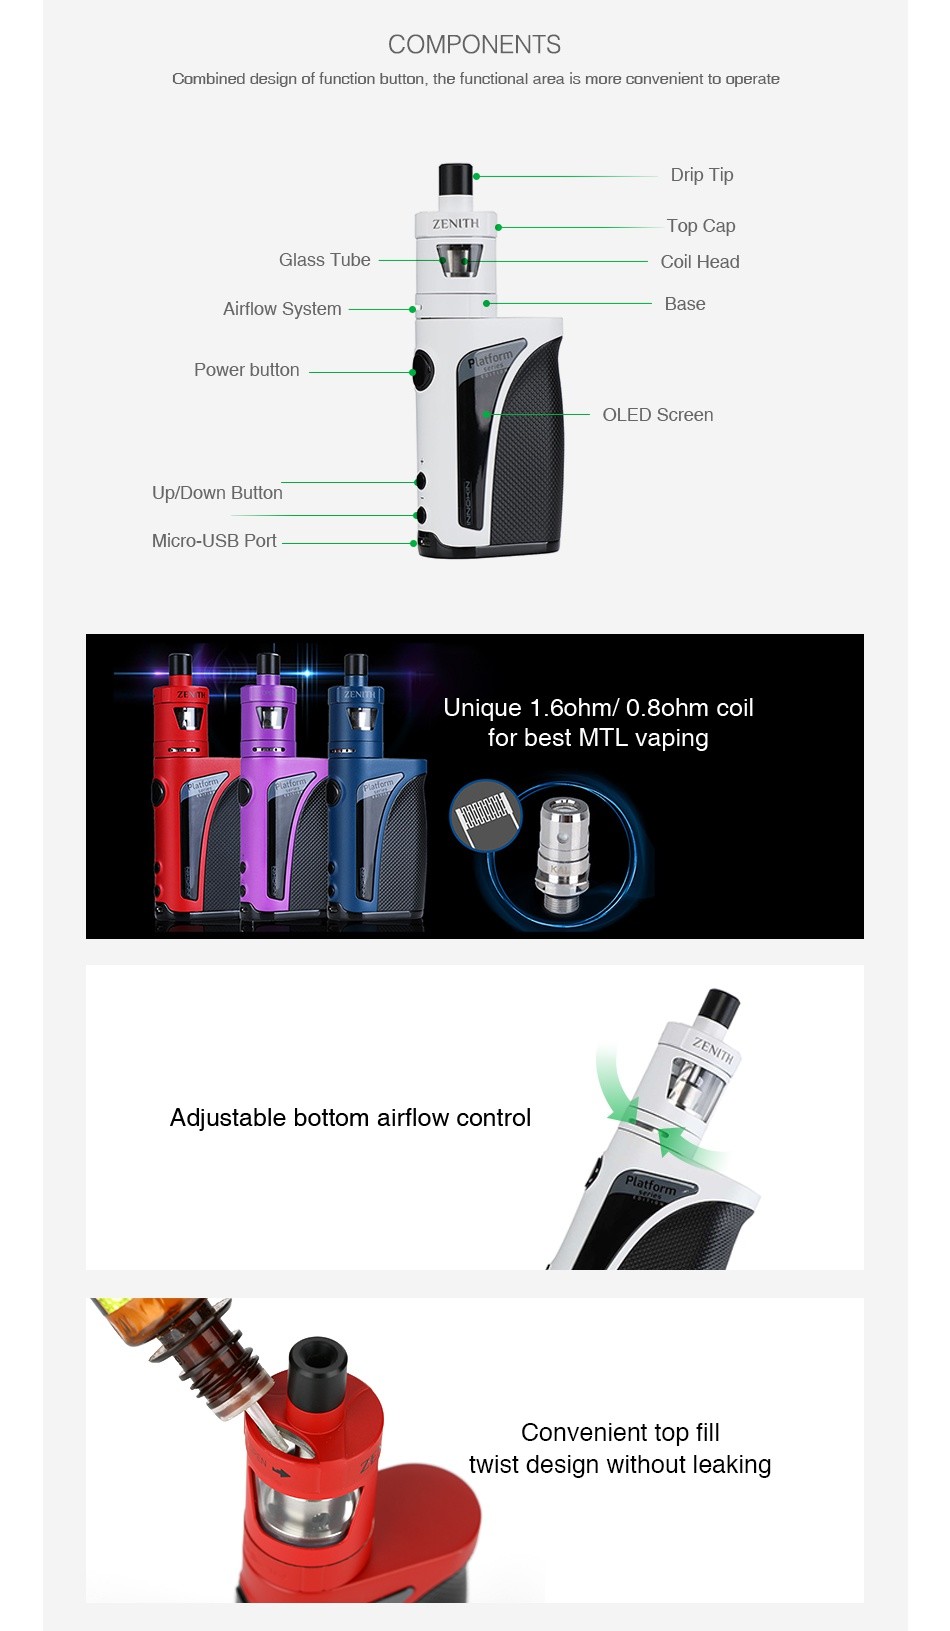 Innokin Kroma-A 75W TC Kit with Zenith Atomizer 2000mAh COMPONENTS Coml Drip I ip ZENITH Glass Tube Airflow Systel ower button OLED Screen Micro USB PO Unique 1ohm   8ohm coi for best mt vapin Adiustable bottom airflow contro Convenient top twist design without leaking